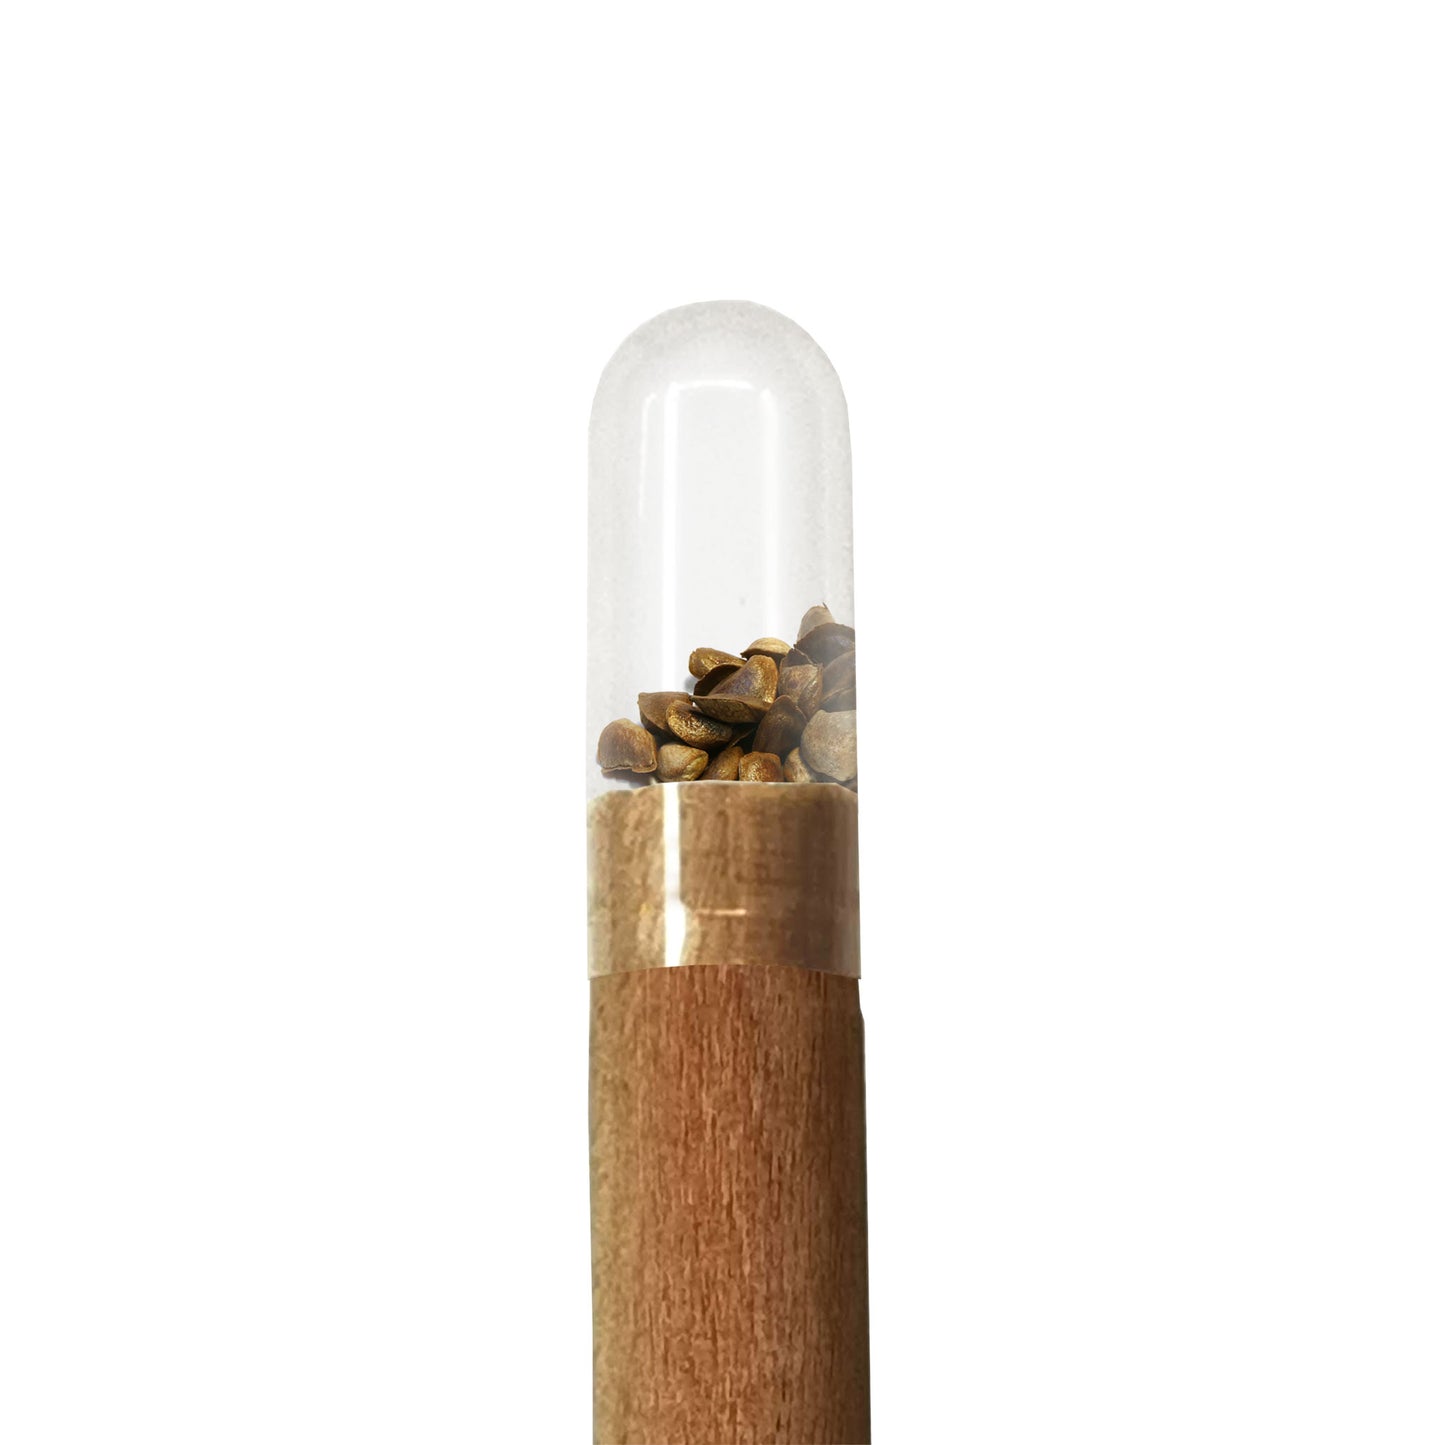 Wooden pencil with wood seeds